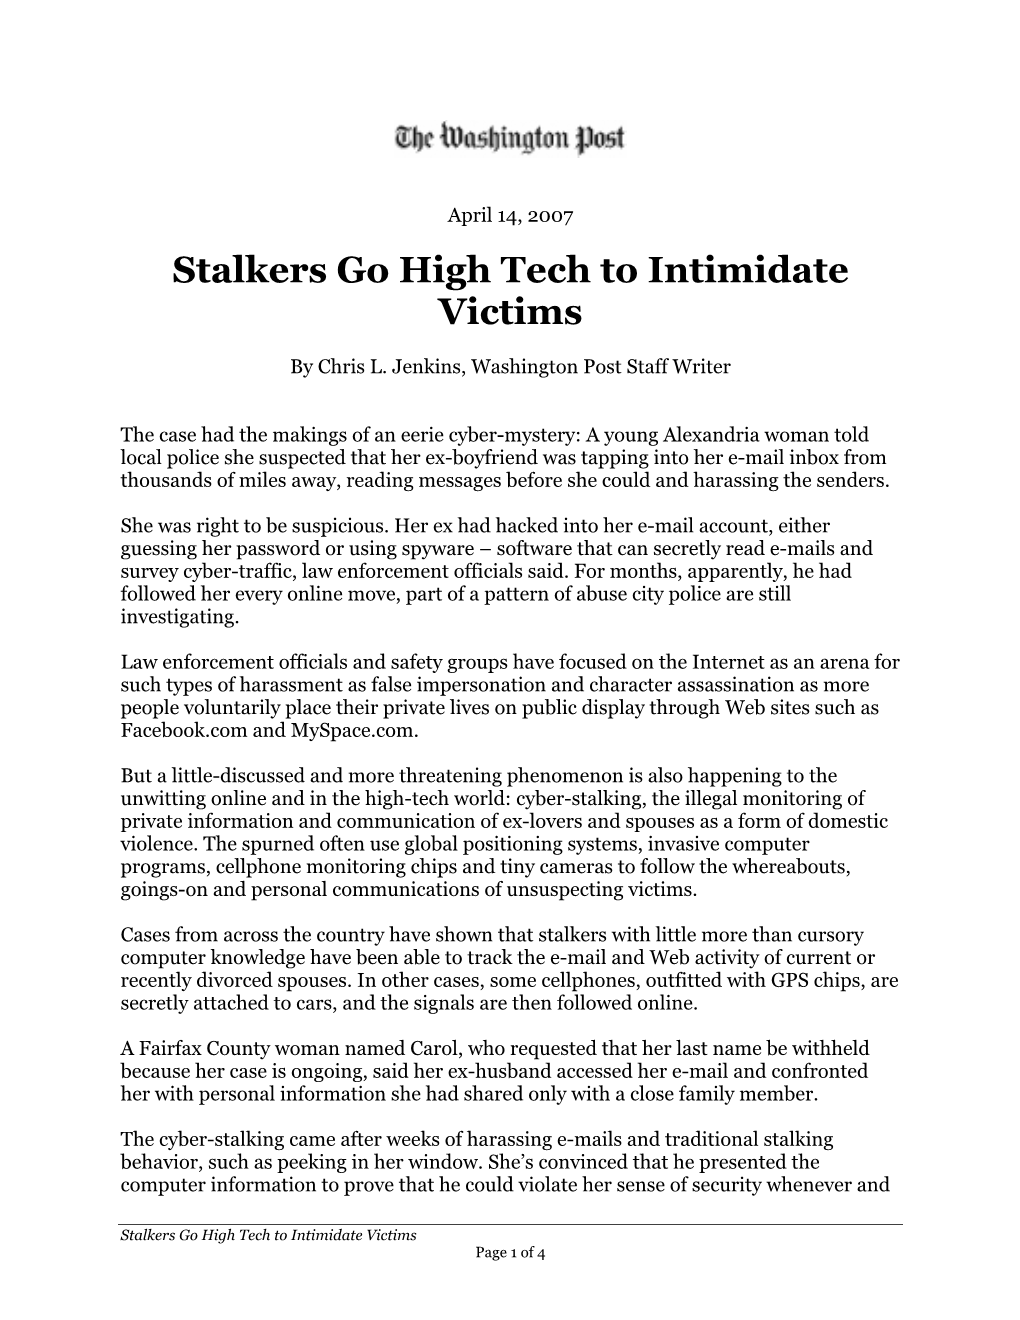 Stalkers Go High Tech to Intimidate Victims